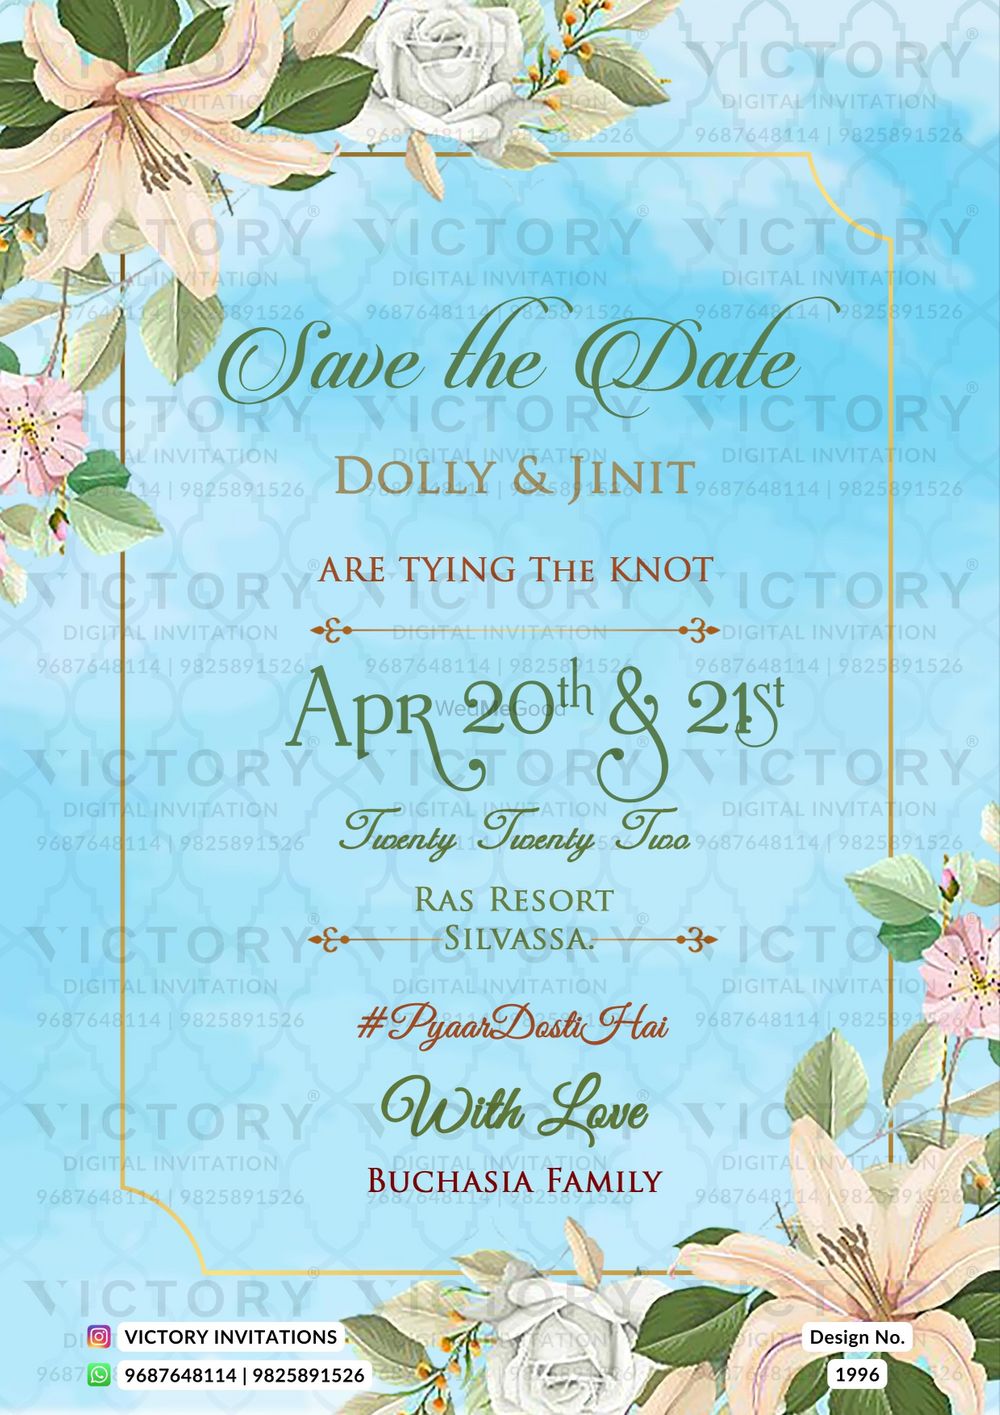 Photo From save the date - By Victory Invitations